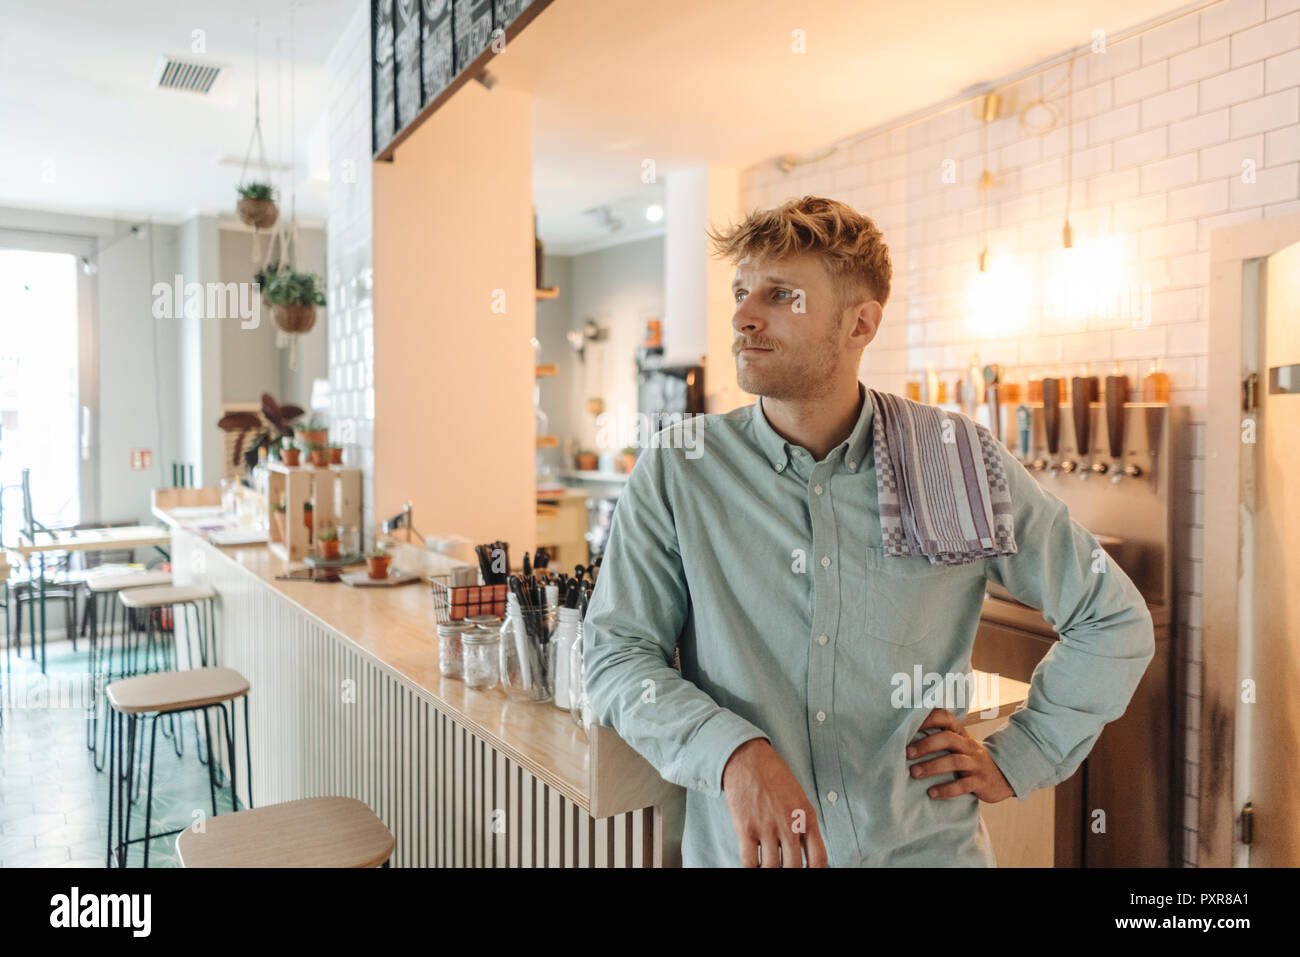 Young man working in his start-up cafe, standing at bar, daydreaming Stock Photo